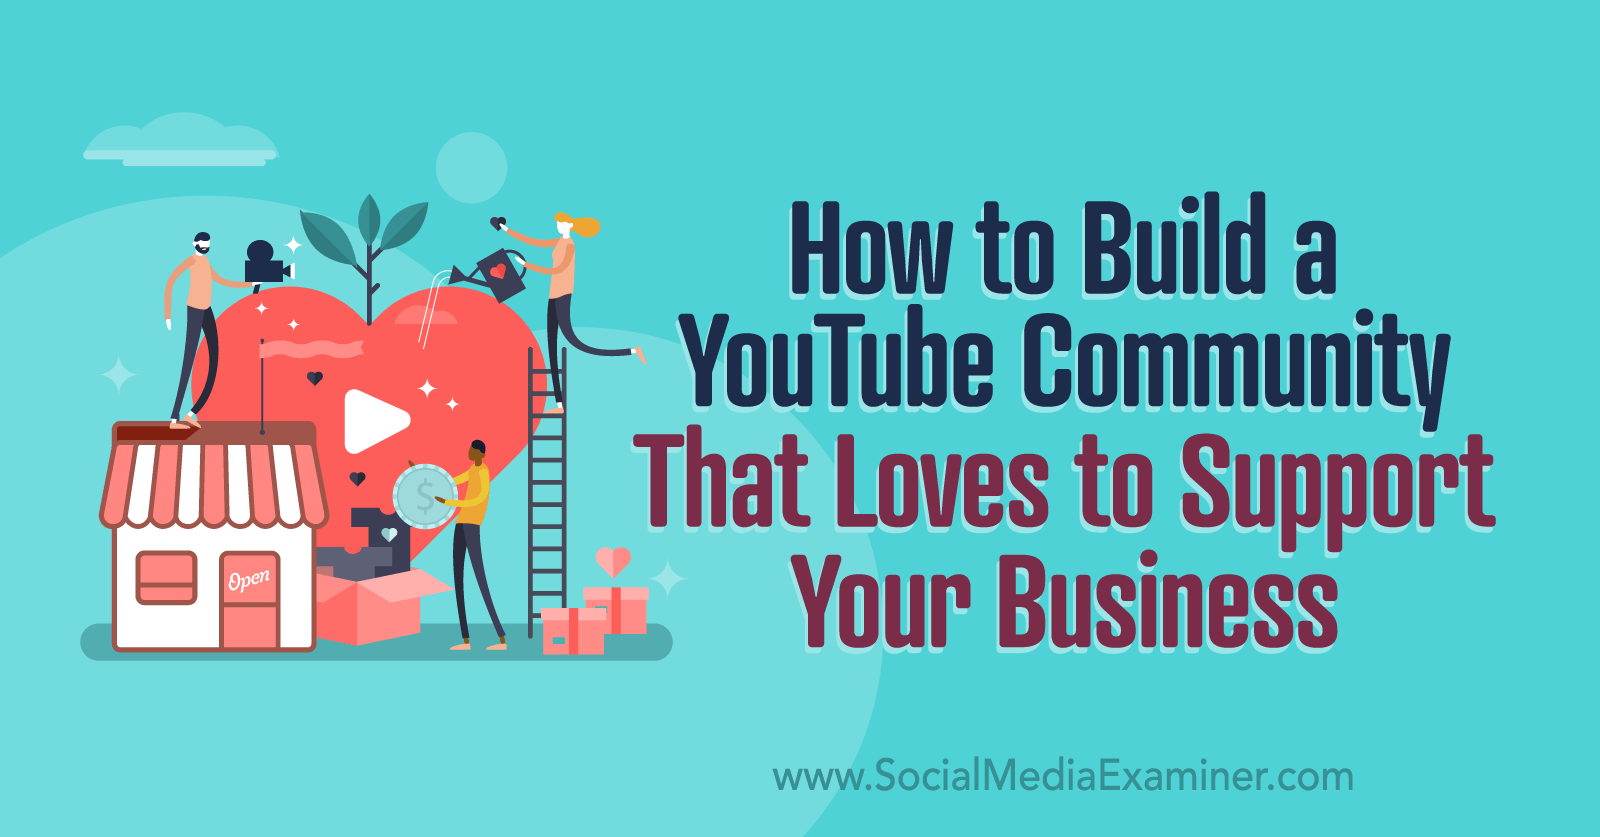 How to Build a YouTube Community That Loves to Support Your Business by Social Media Examiner